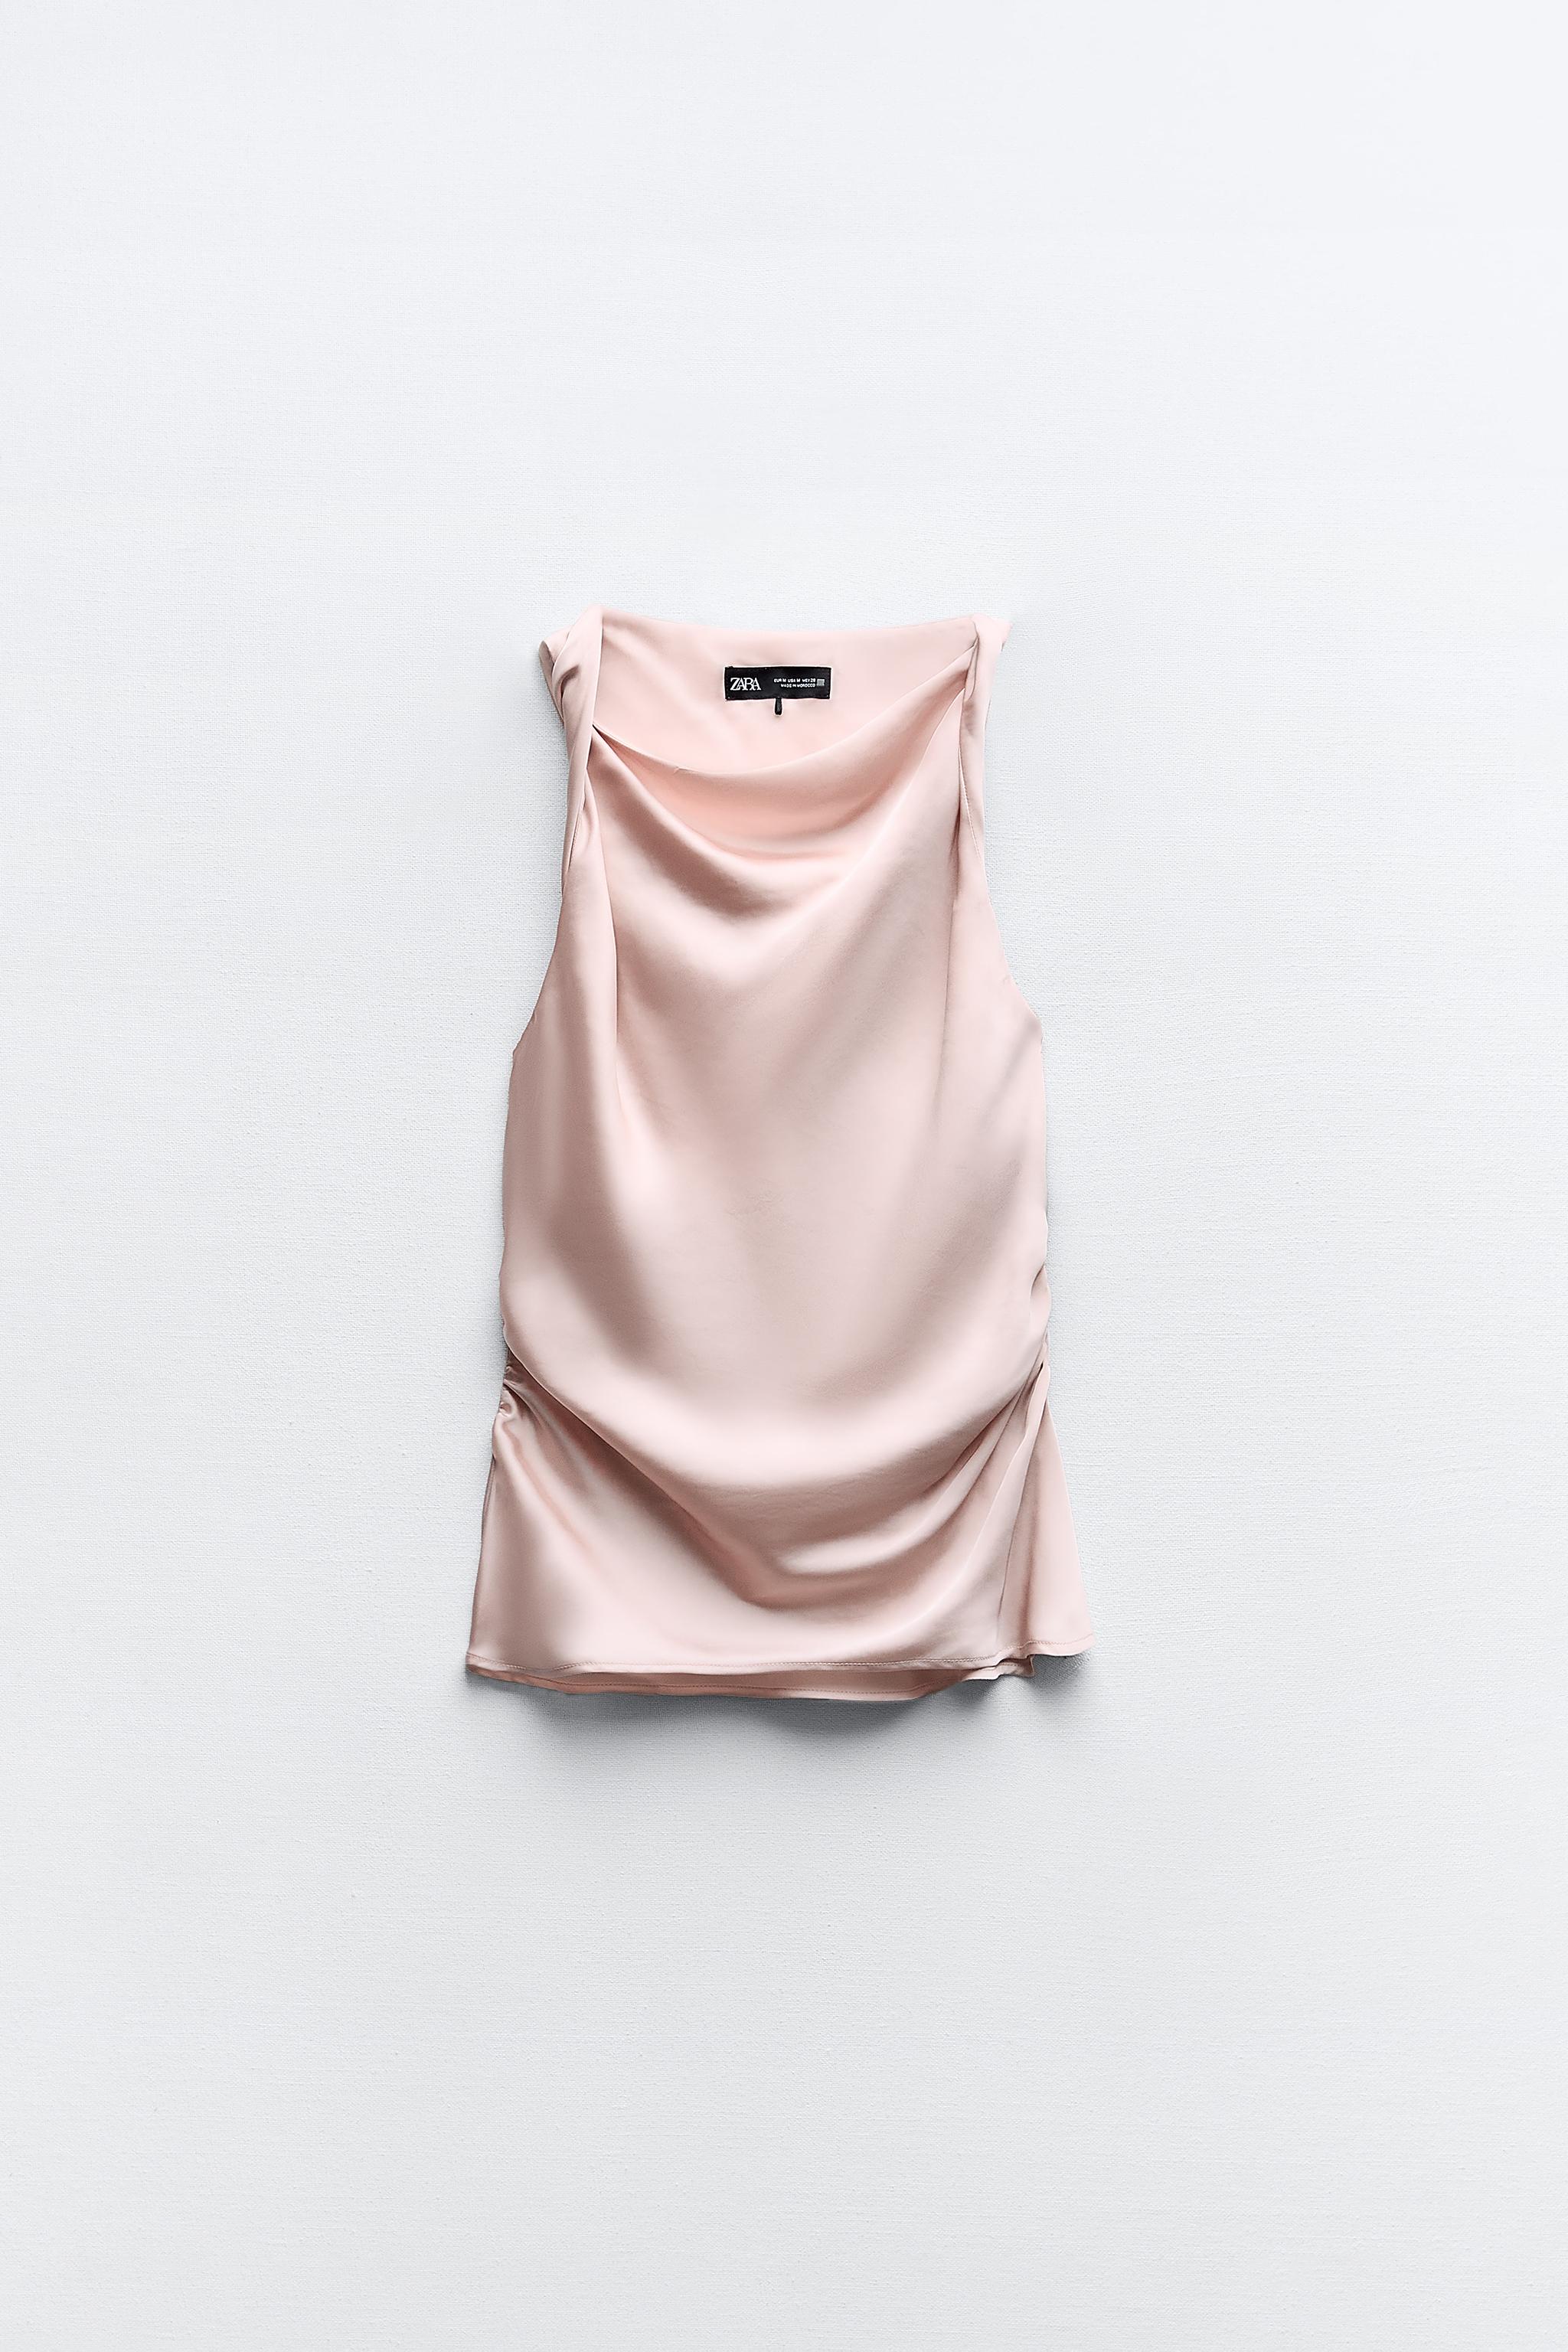 ZARA NWT Satin Corset Top Pink - $23 (23% Off Retail) New With Tags - From  Sofya